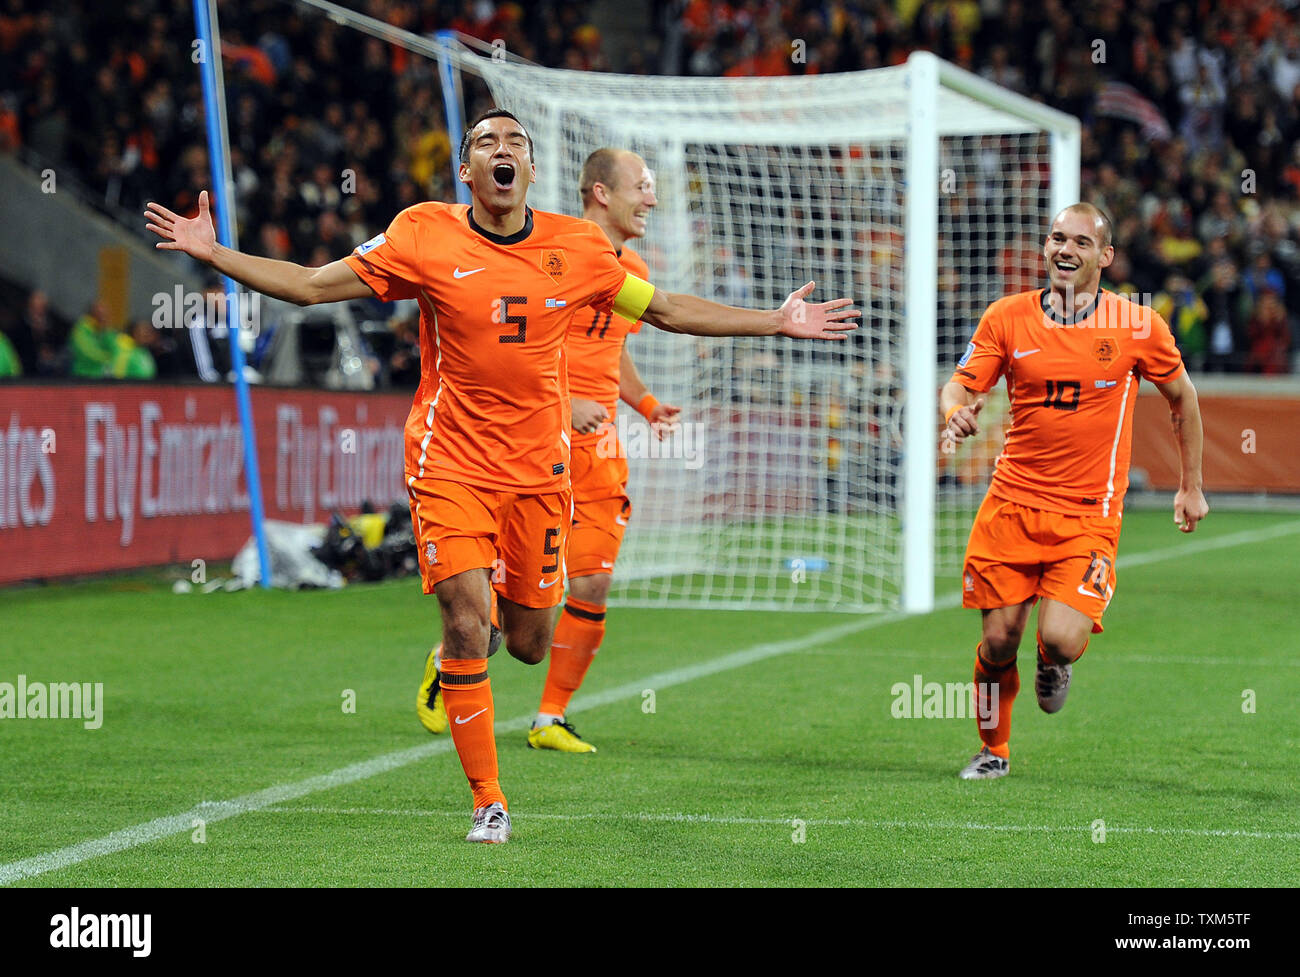 Giovanni Van Bronckhorst of Holland celebrates scoring the opening goal during the FIFA World Cup Semi Final match at the Green Point Stadium in Cape Town, South Africa on July 6, 2010. UPI/Chris Brunskill Stock Photo